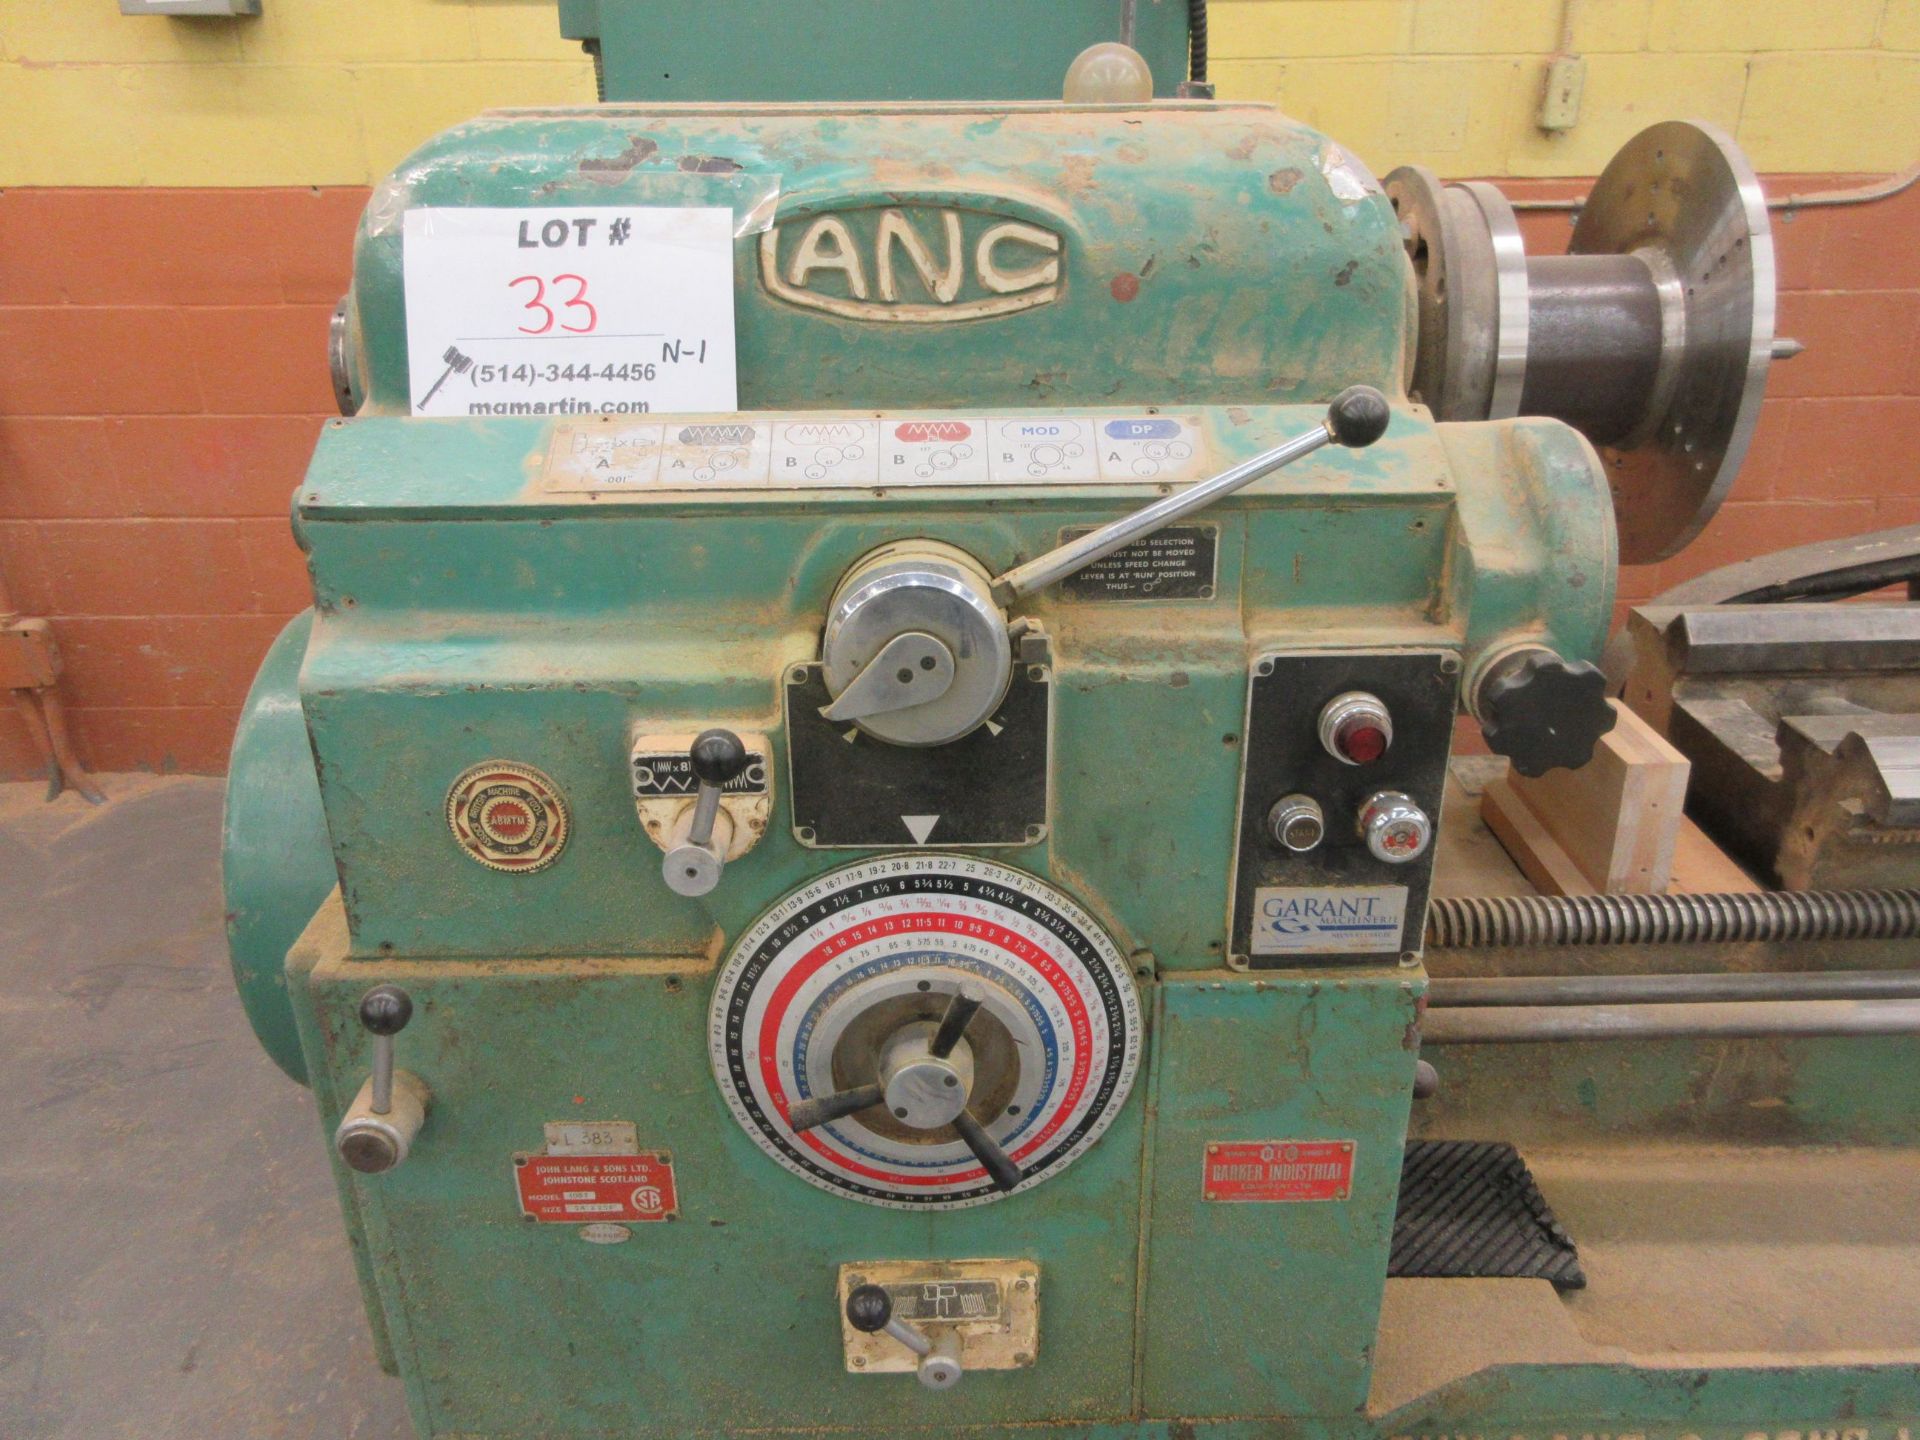 JOHN LANG & SONS, 20ft lathe, Mod: 10B2, 600 volts (SUBJECT TO BANK APPROVAL) - Image 2 of 8